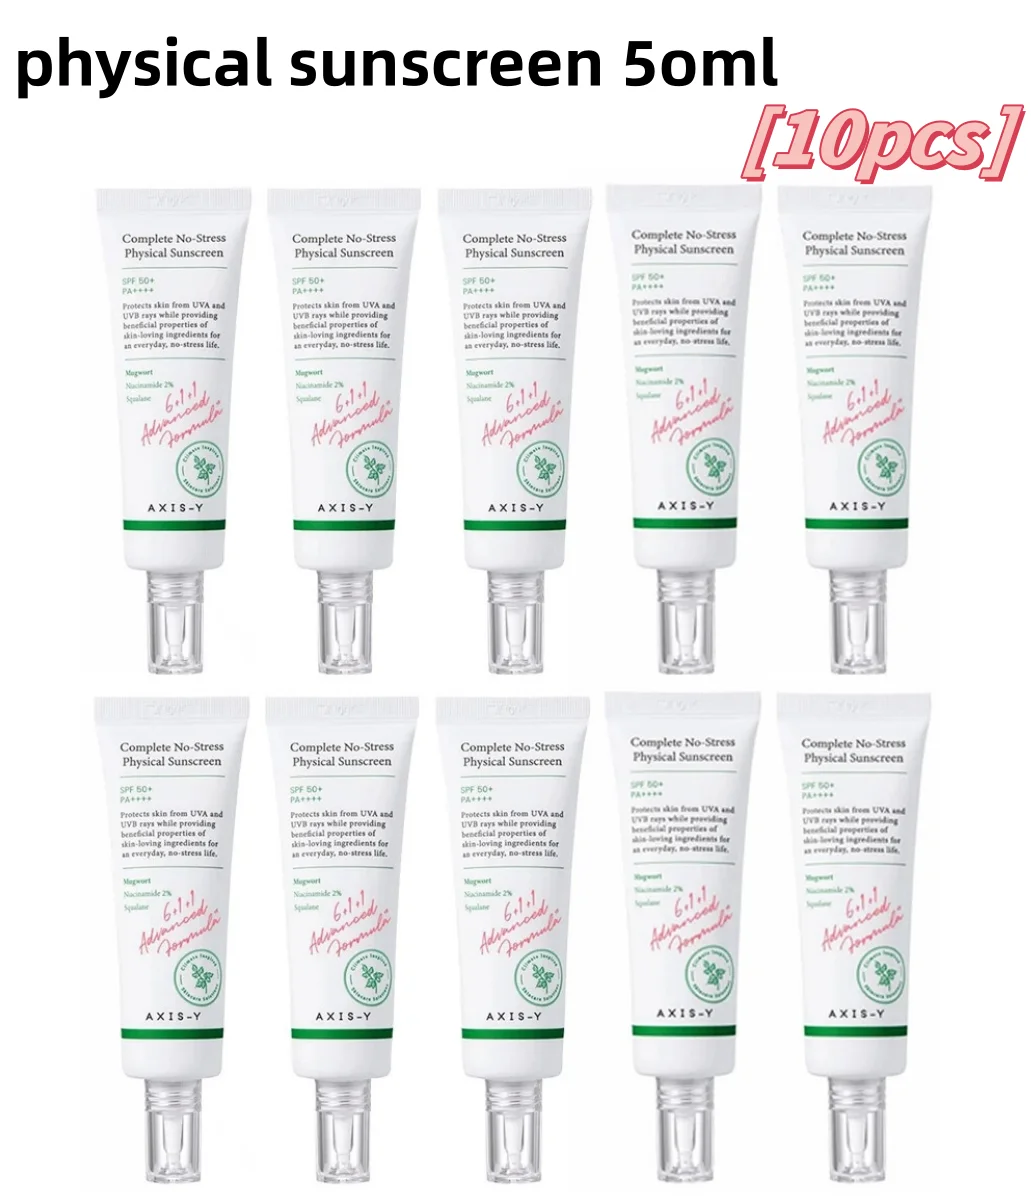 

10PCS AXIS-Y Complete No-Stress Physical Sunscreen 50ml SPF50+PA++++ Moisturizing Whitening Waterproof Skincare Refreshing Water